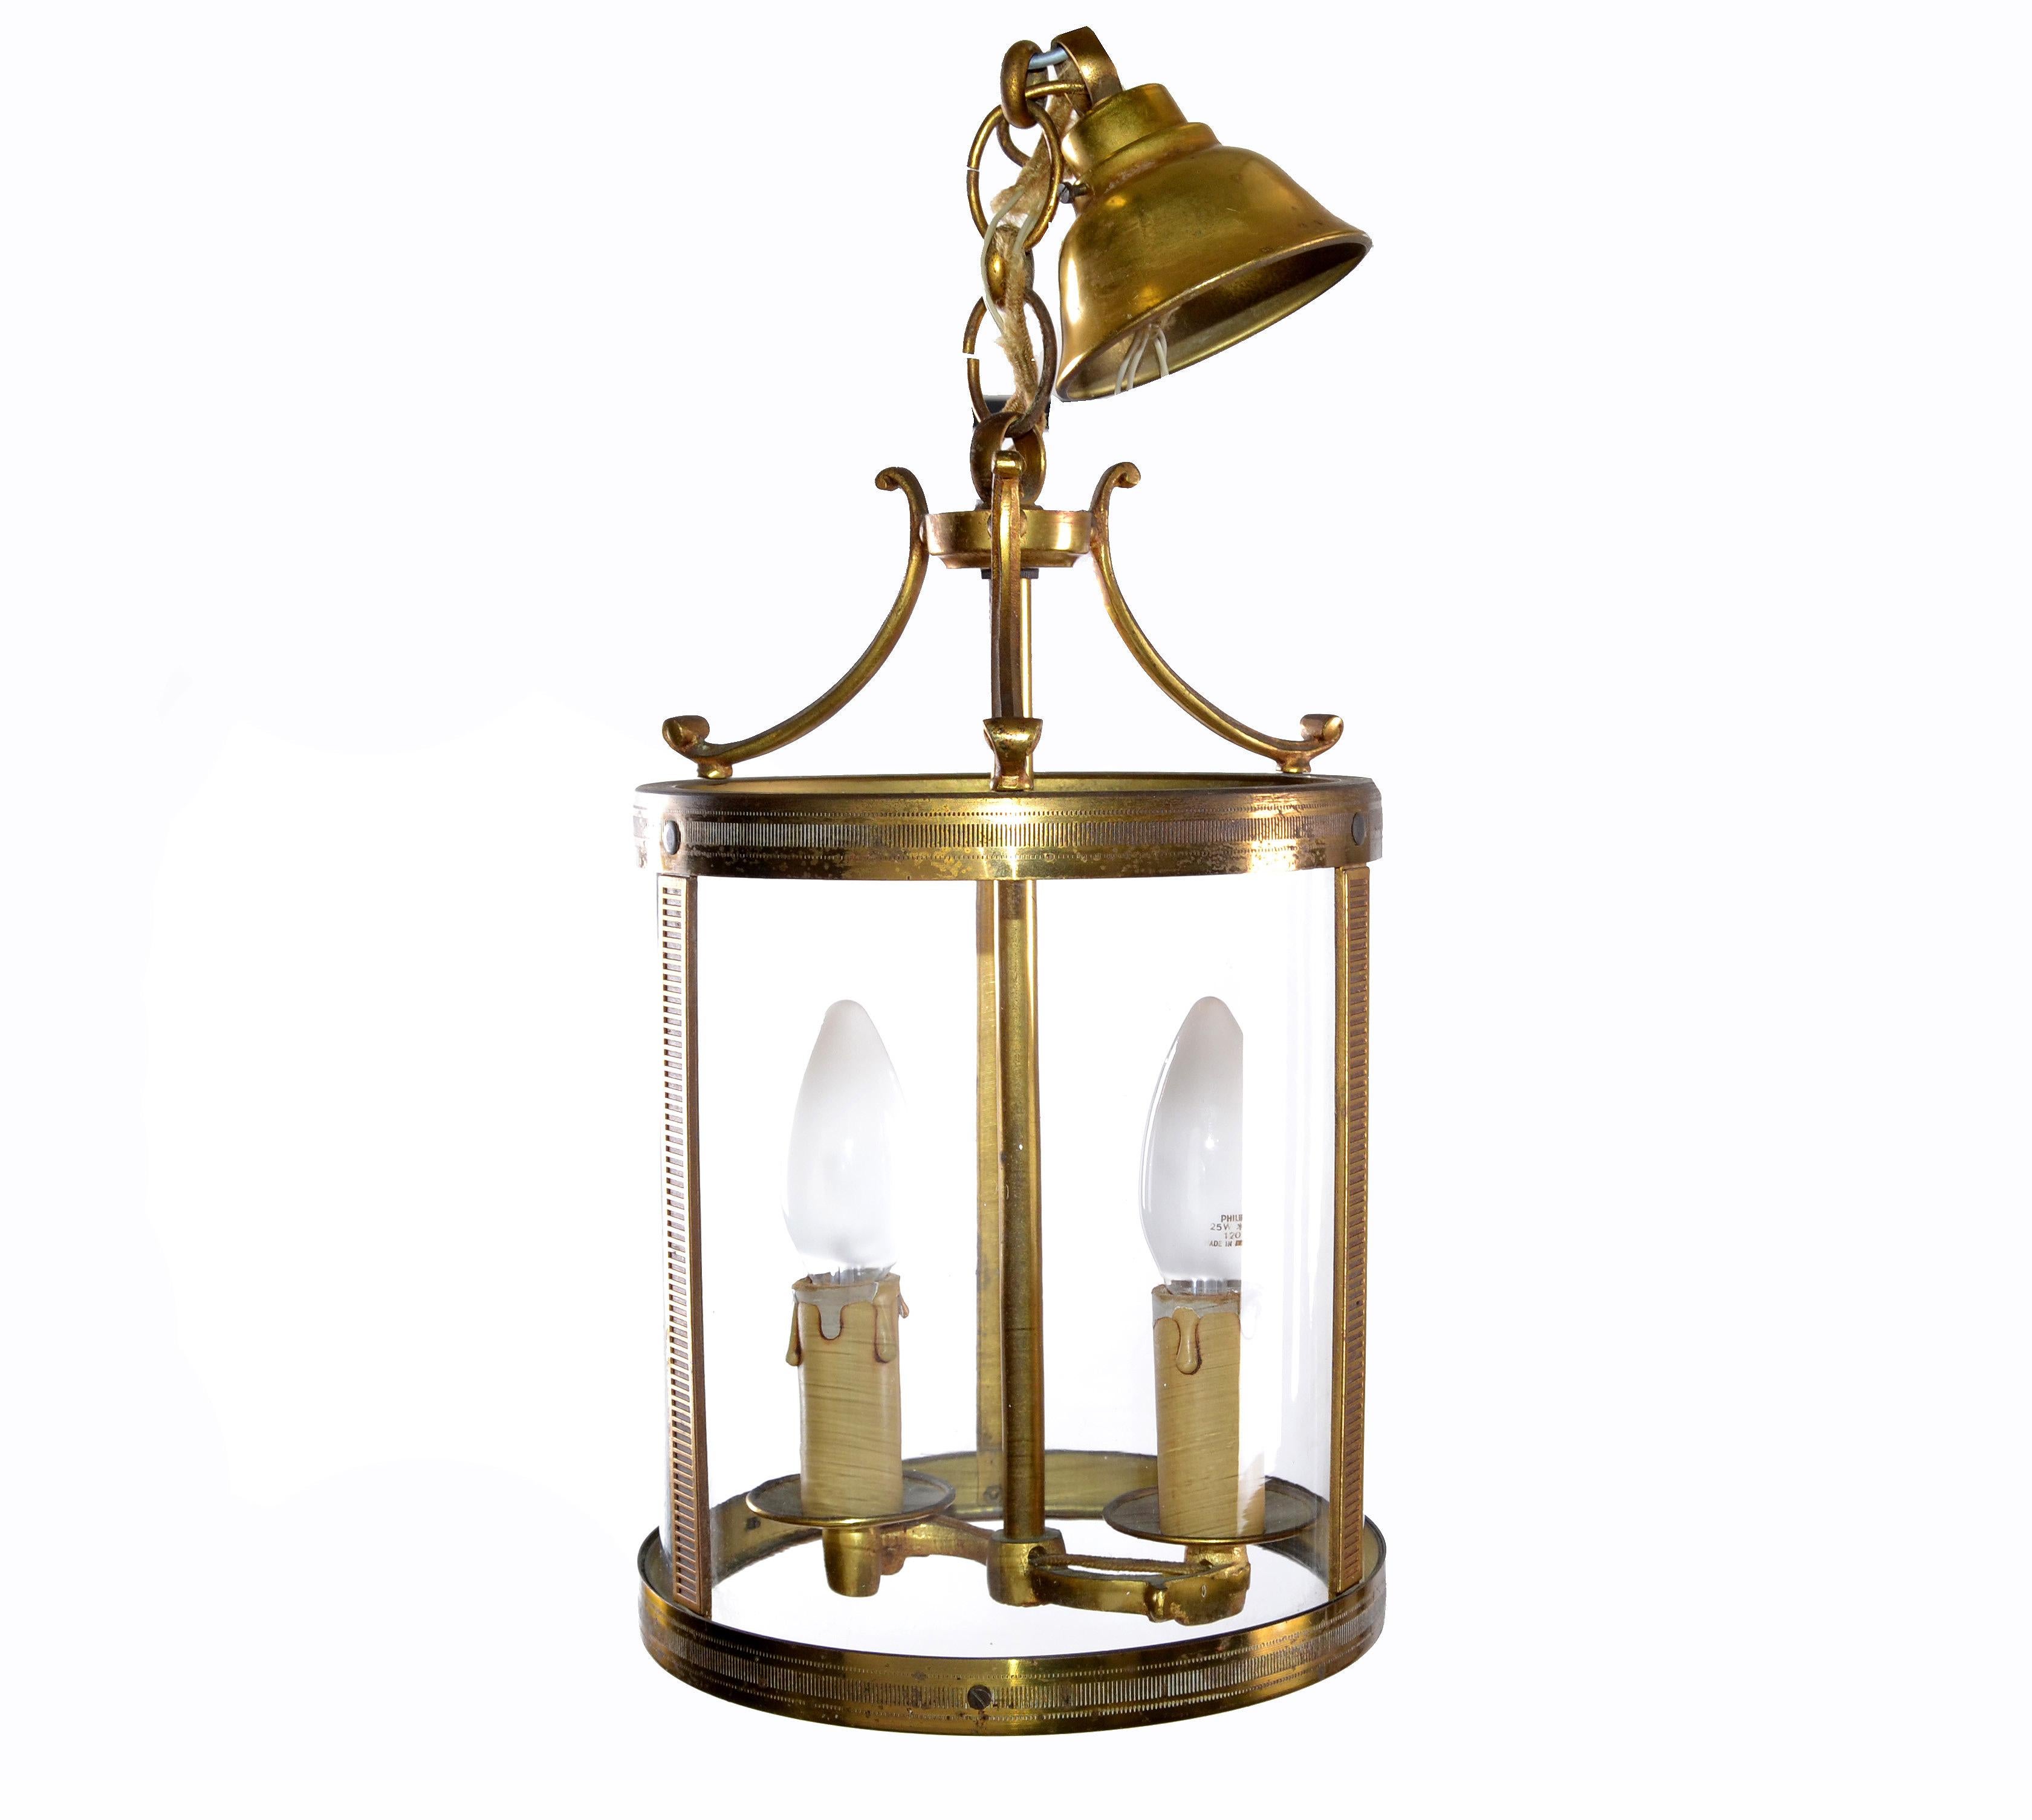 French Parisian two-light glass & bronze lantern with canopy.
The lantern uses 2 max. 40 watts light bulb.
The length of the chain is 3.5 inches.